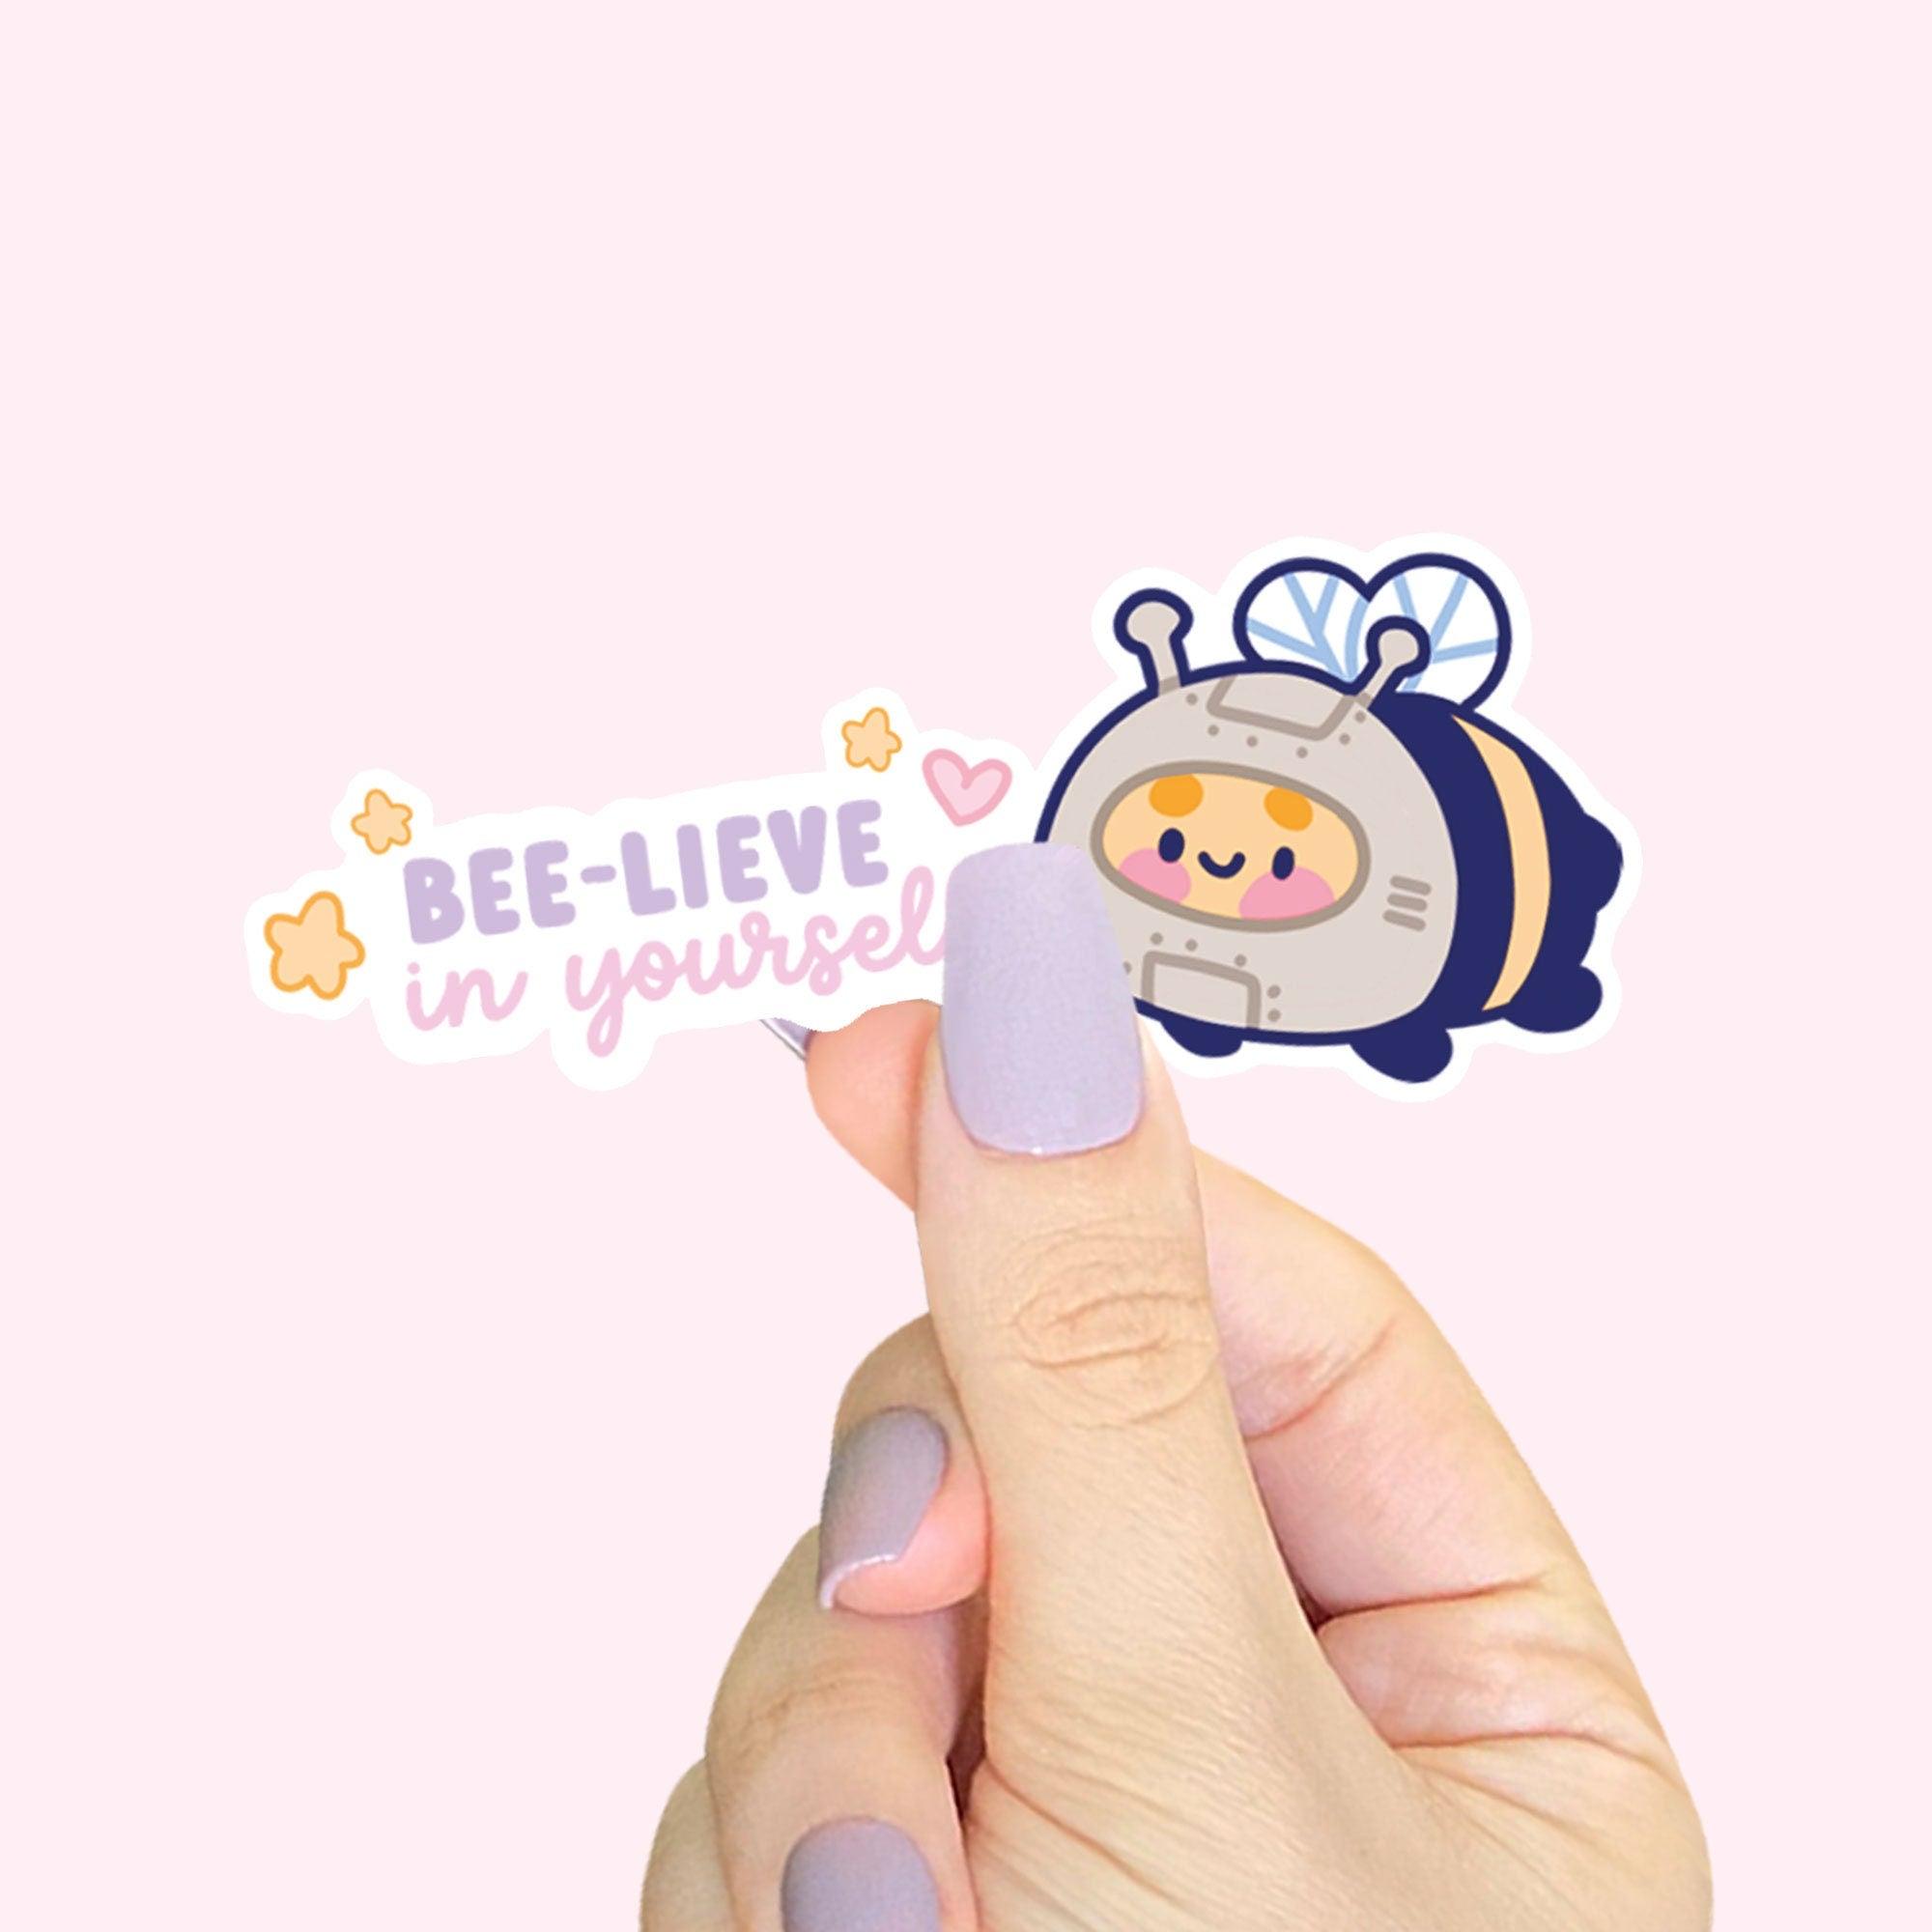 Image of Bumblebutt 'Bee-Lieve in Yourself' die-cut vinyl sticker on a white background.